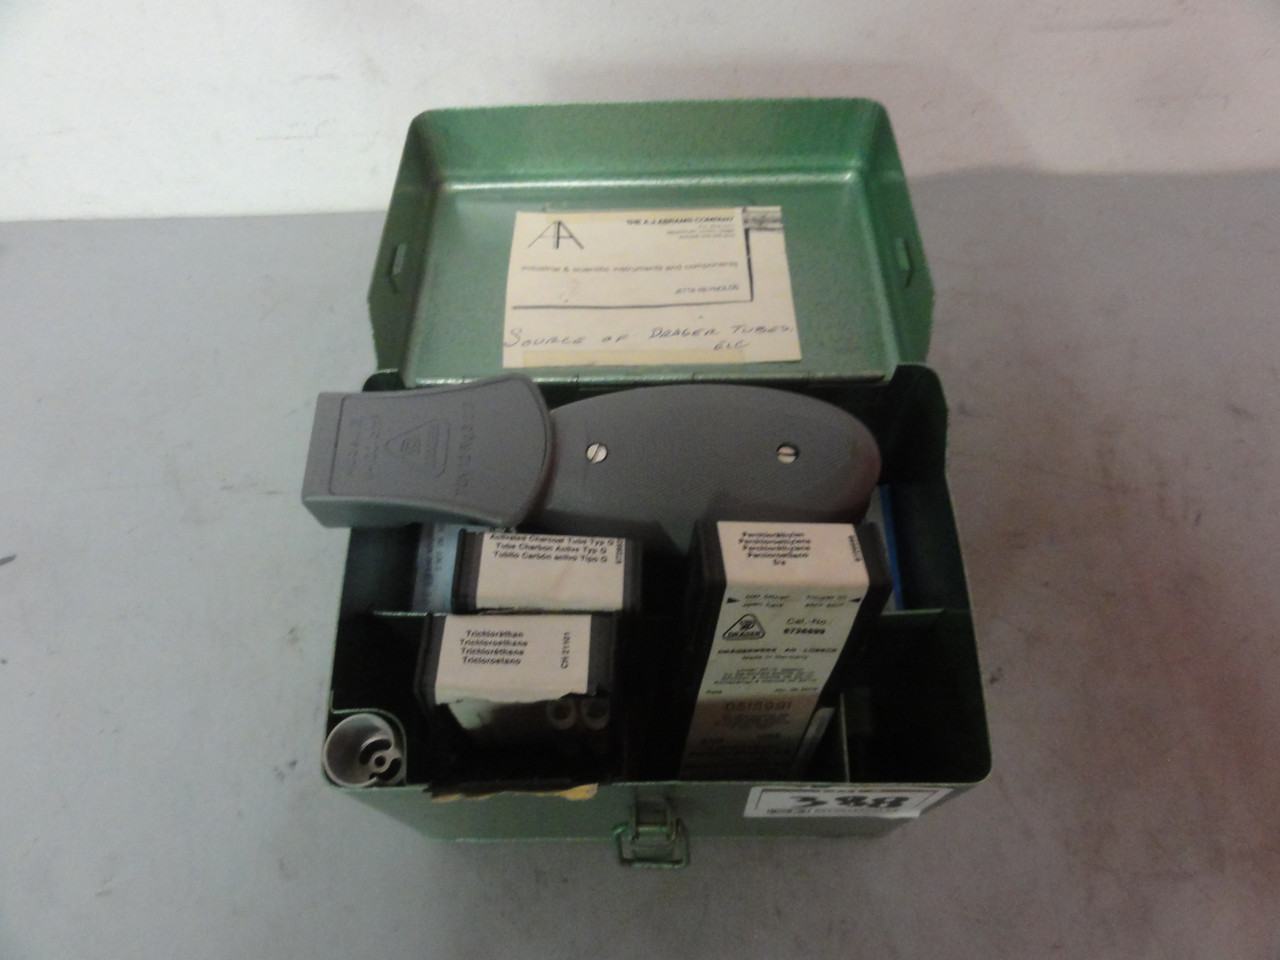 Drager Model 21/31 Gasspurgerat/ Multi Gas Detector With Other Parts and Tubes